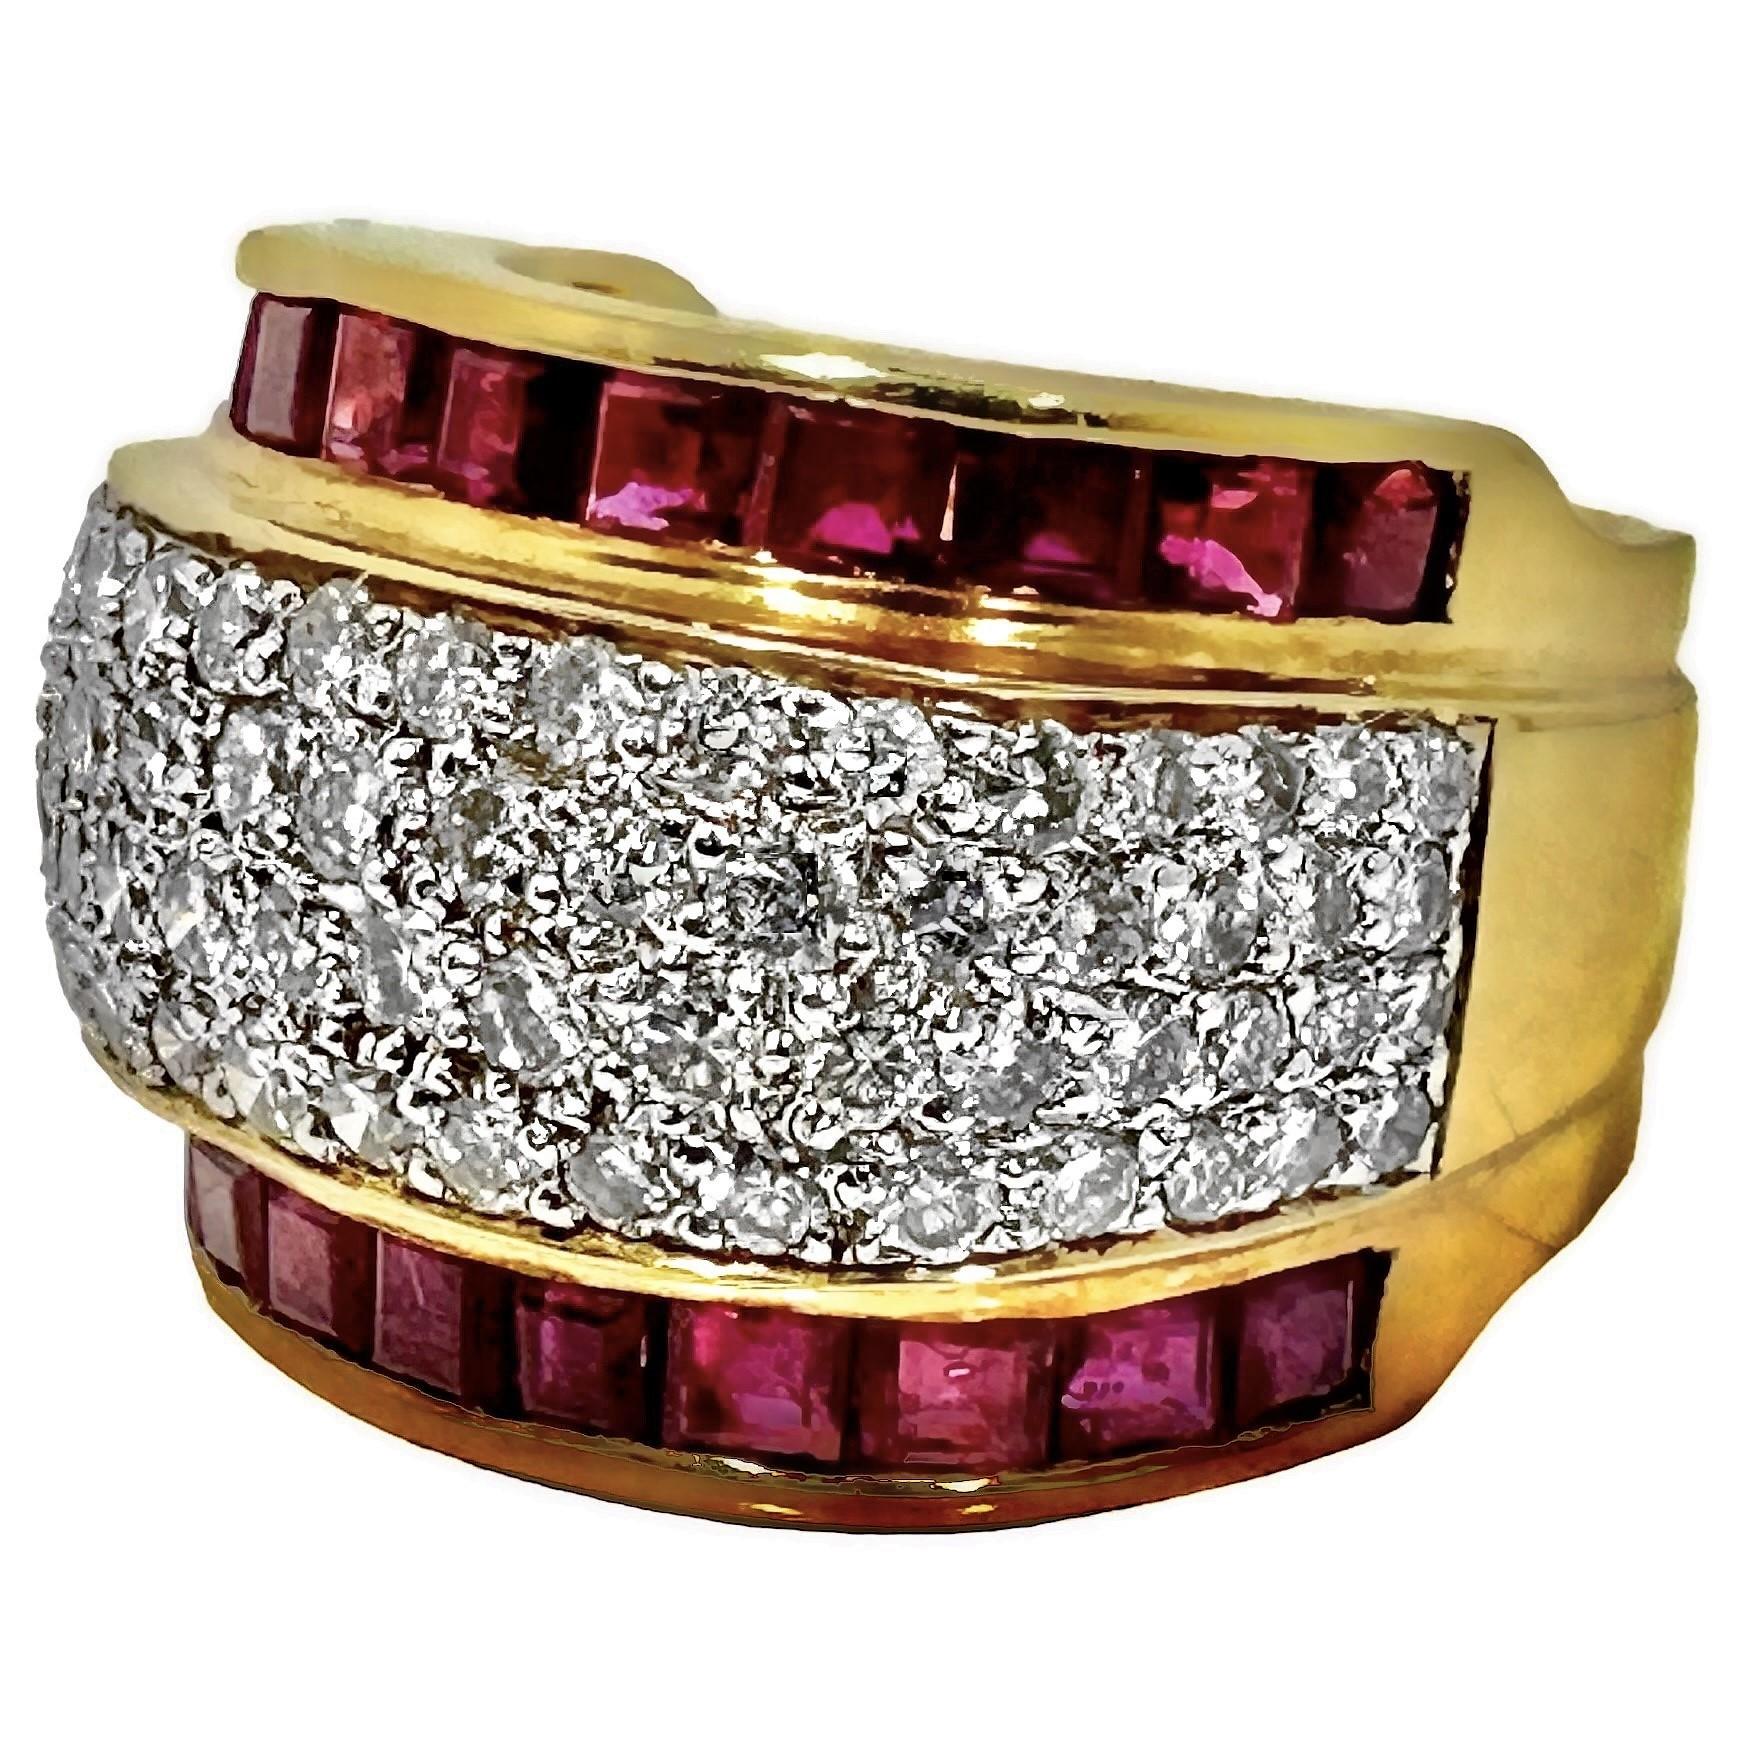 This sleek 18K yellow gold ring is centered around four rows of round brilliant cut diamonds and vivid, square cut rubies. The assorted diamonds weigh a total of 1.93ct of overall H color and VS2 clarity.
To the north and south of the diamonds is a